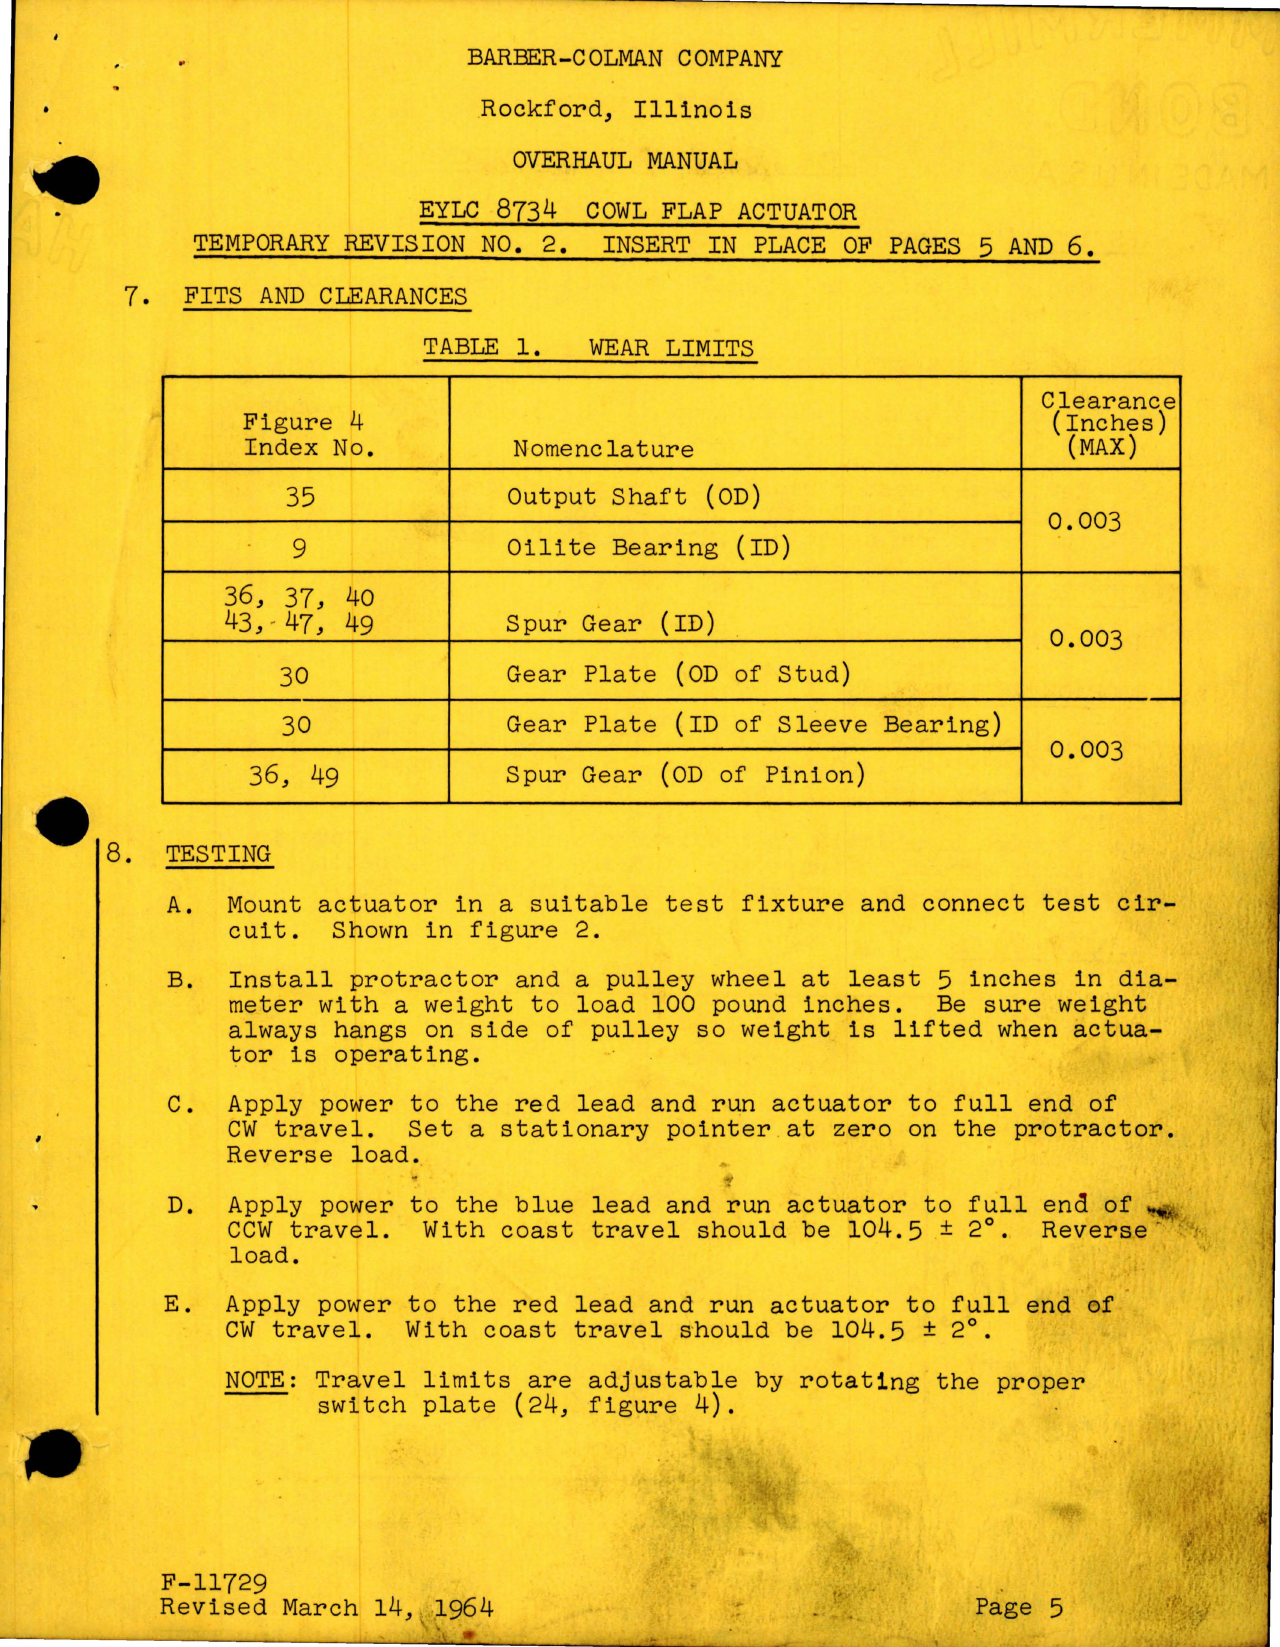 Sample page 5 from AirCorps Library document: Overhaul Instructions for Cowl Flap Actuator - EYLC 8734 